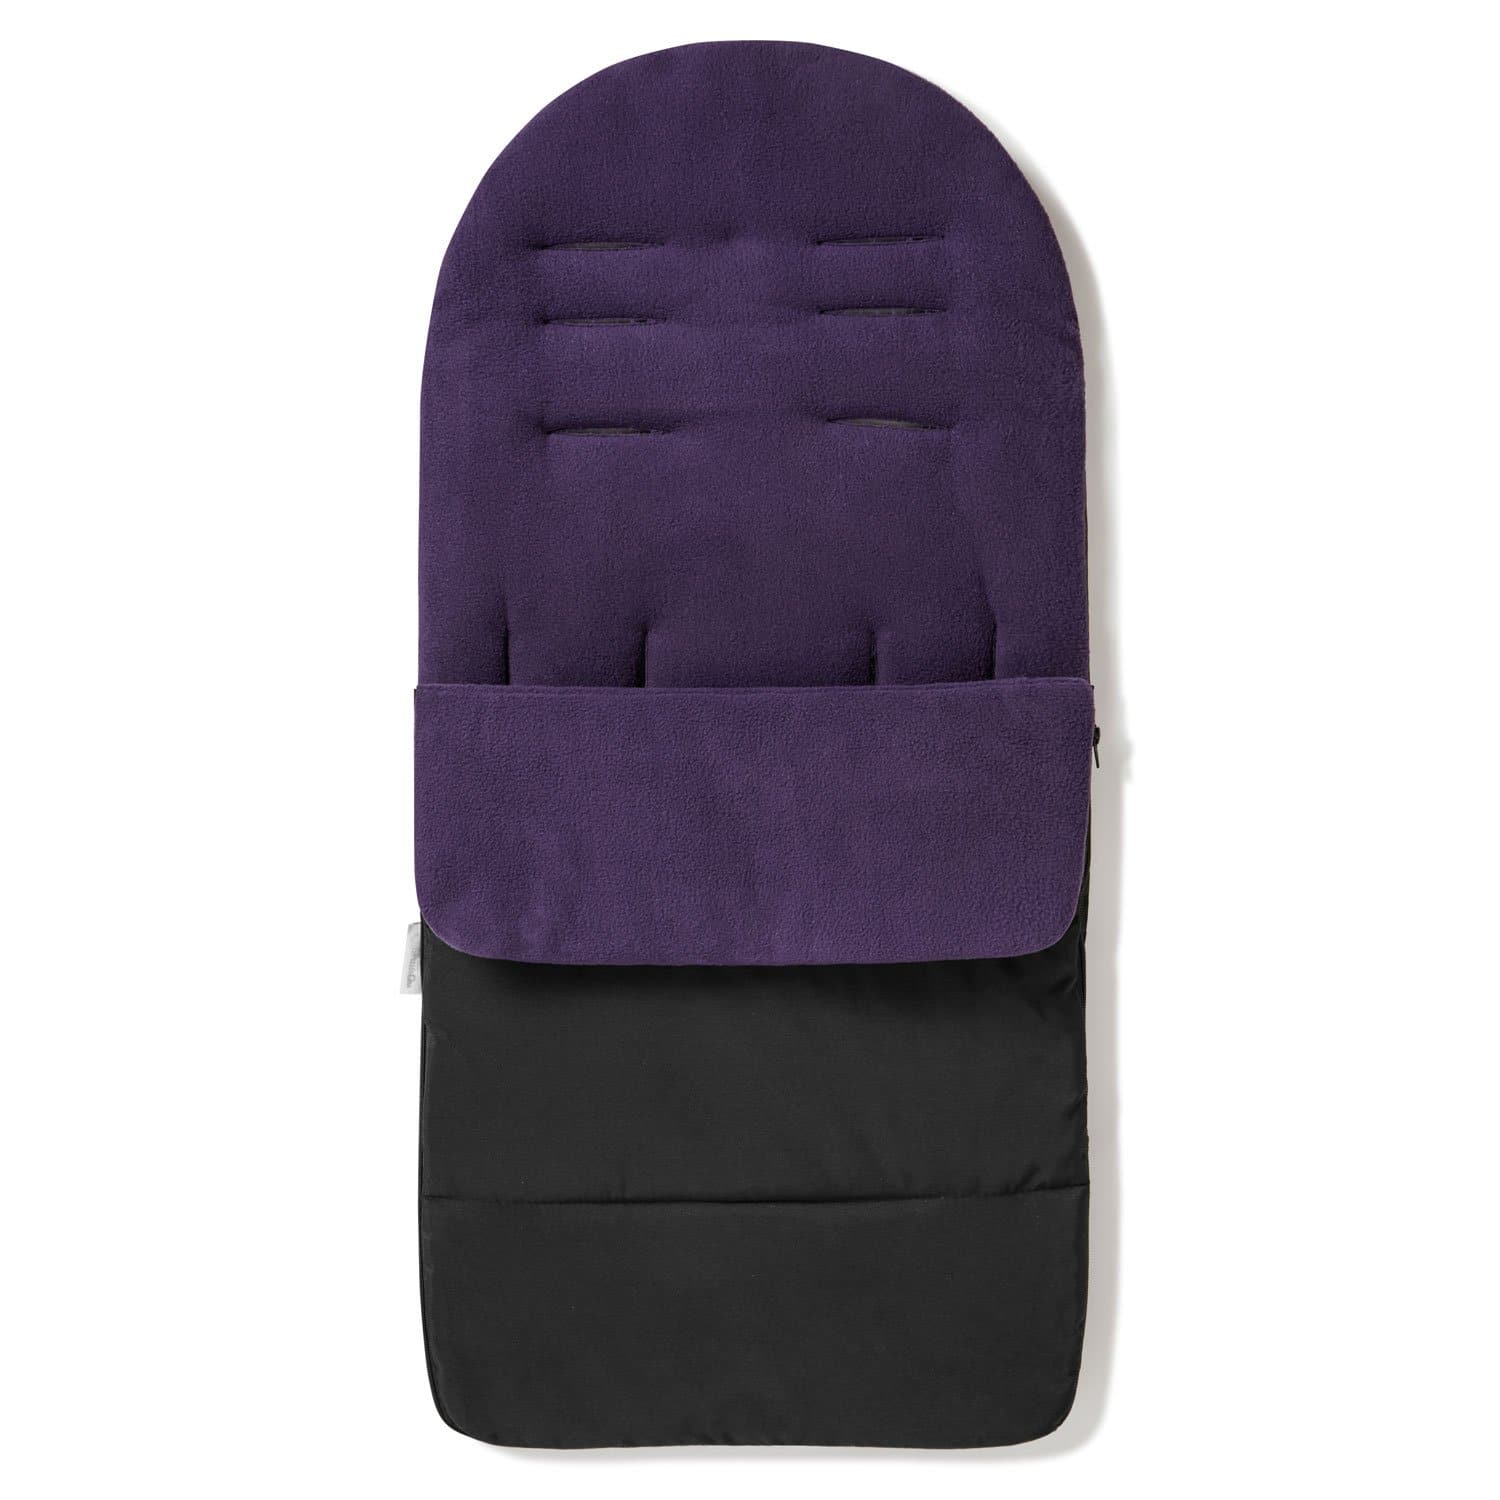 Premium Footmuff / Cosy Toes Compatible with Mee-Go - Plum Purple / Fits All Models | For Your Little One